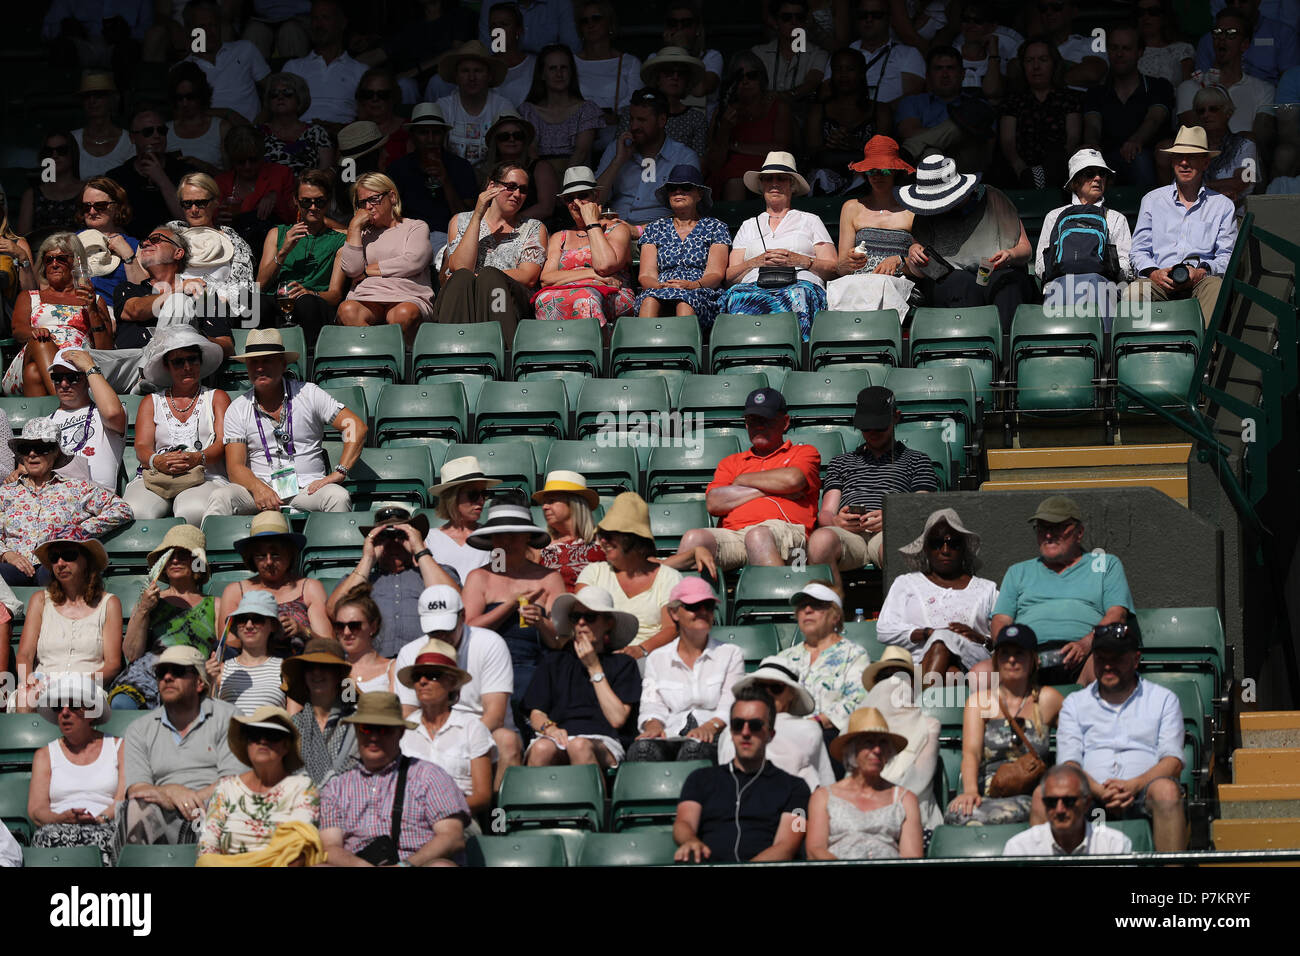 London, UK. 7th July 2018. The Wimbledon Tennis Championships, Day 6; Empty seats as fans watch the England World cup match during the Alexander Zverev versus Ernest Gulbis (Lat) match Credit: Action Plus Sports Images/Alamy Live News Credit: Action Plus Sports Images/Alamy Live News Credit: Action Plus Sports Images/Alamy Live News Credit: Action Plus Sports Images/Alamy Live News Stock Photo